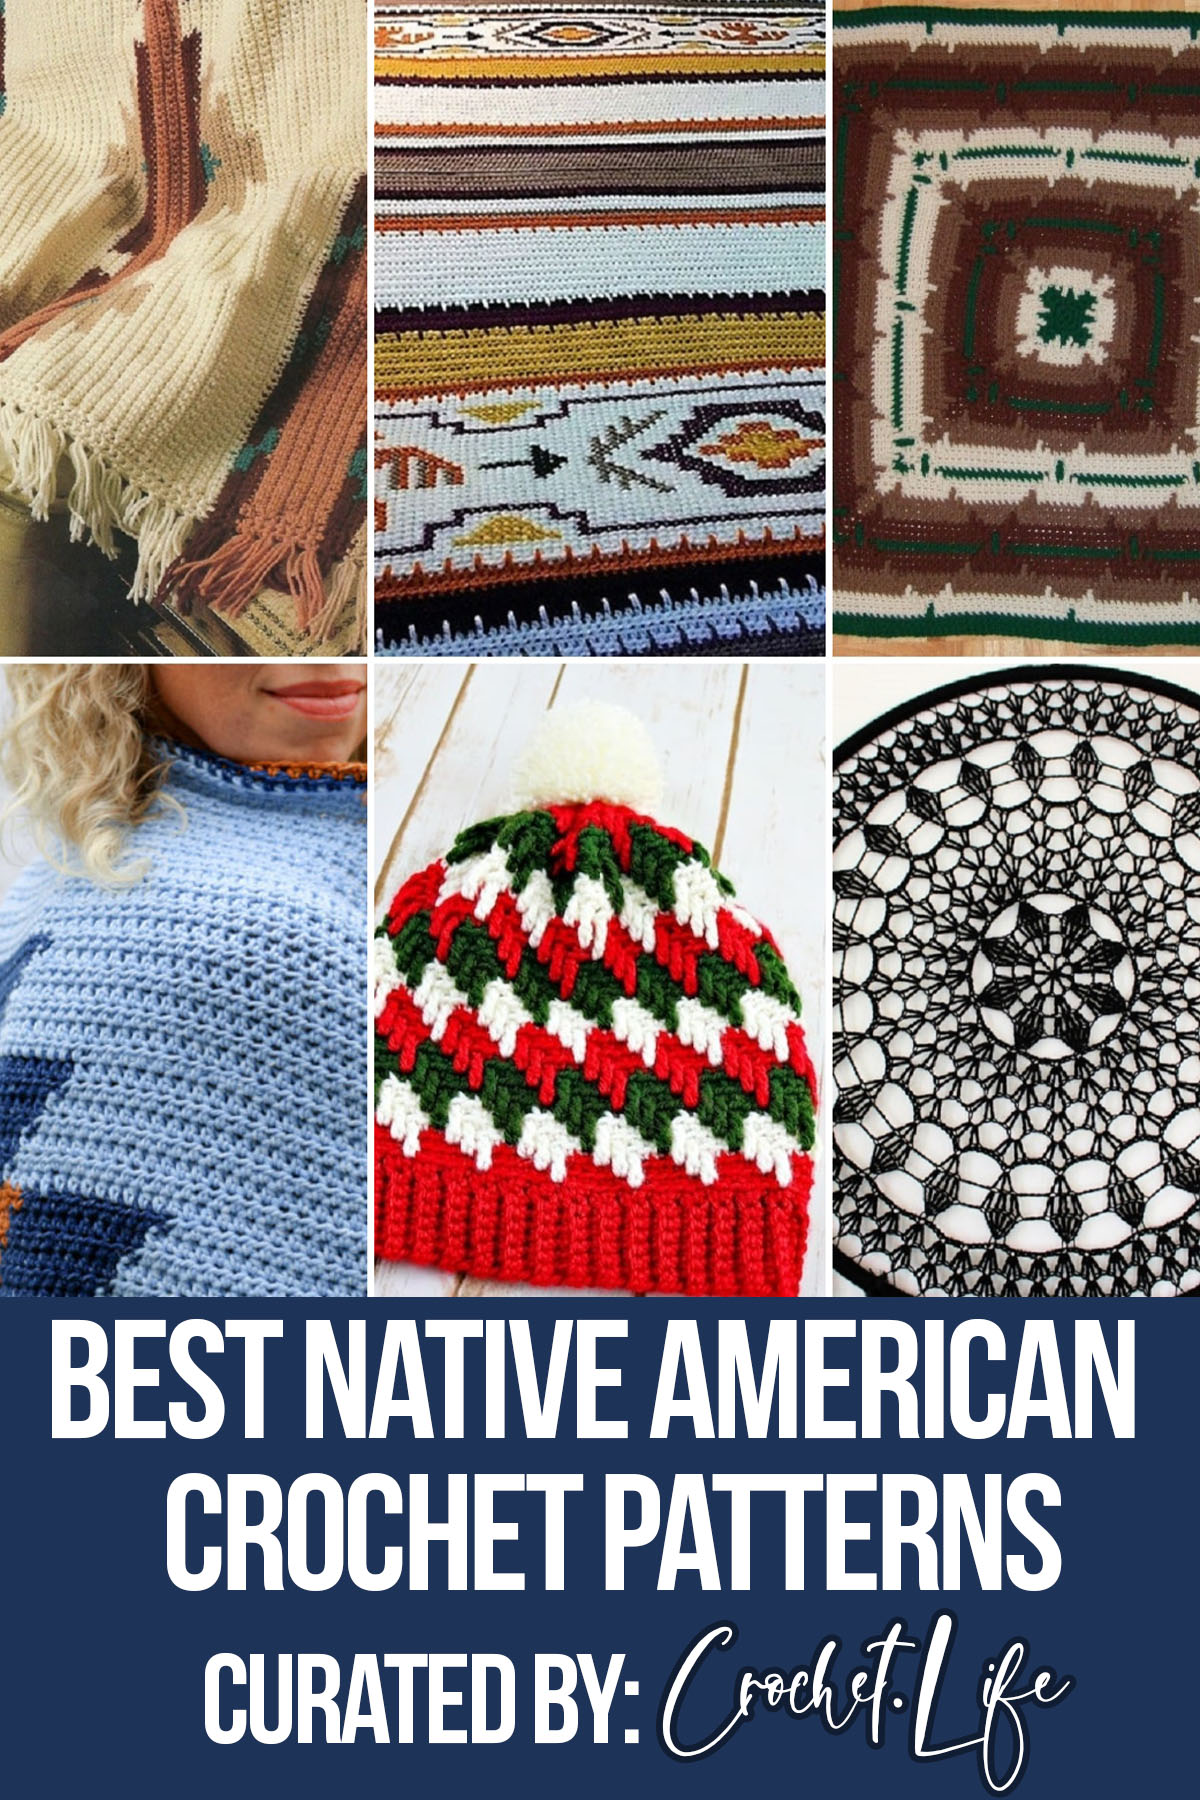 photo collage of crochet patterns of native american style ideas with text which reads best native american crochet patterns curated by crochet.life